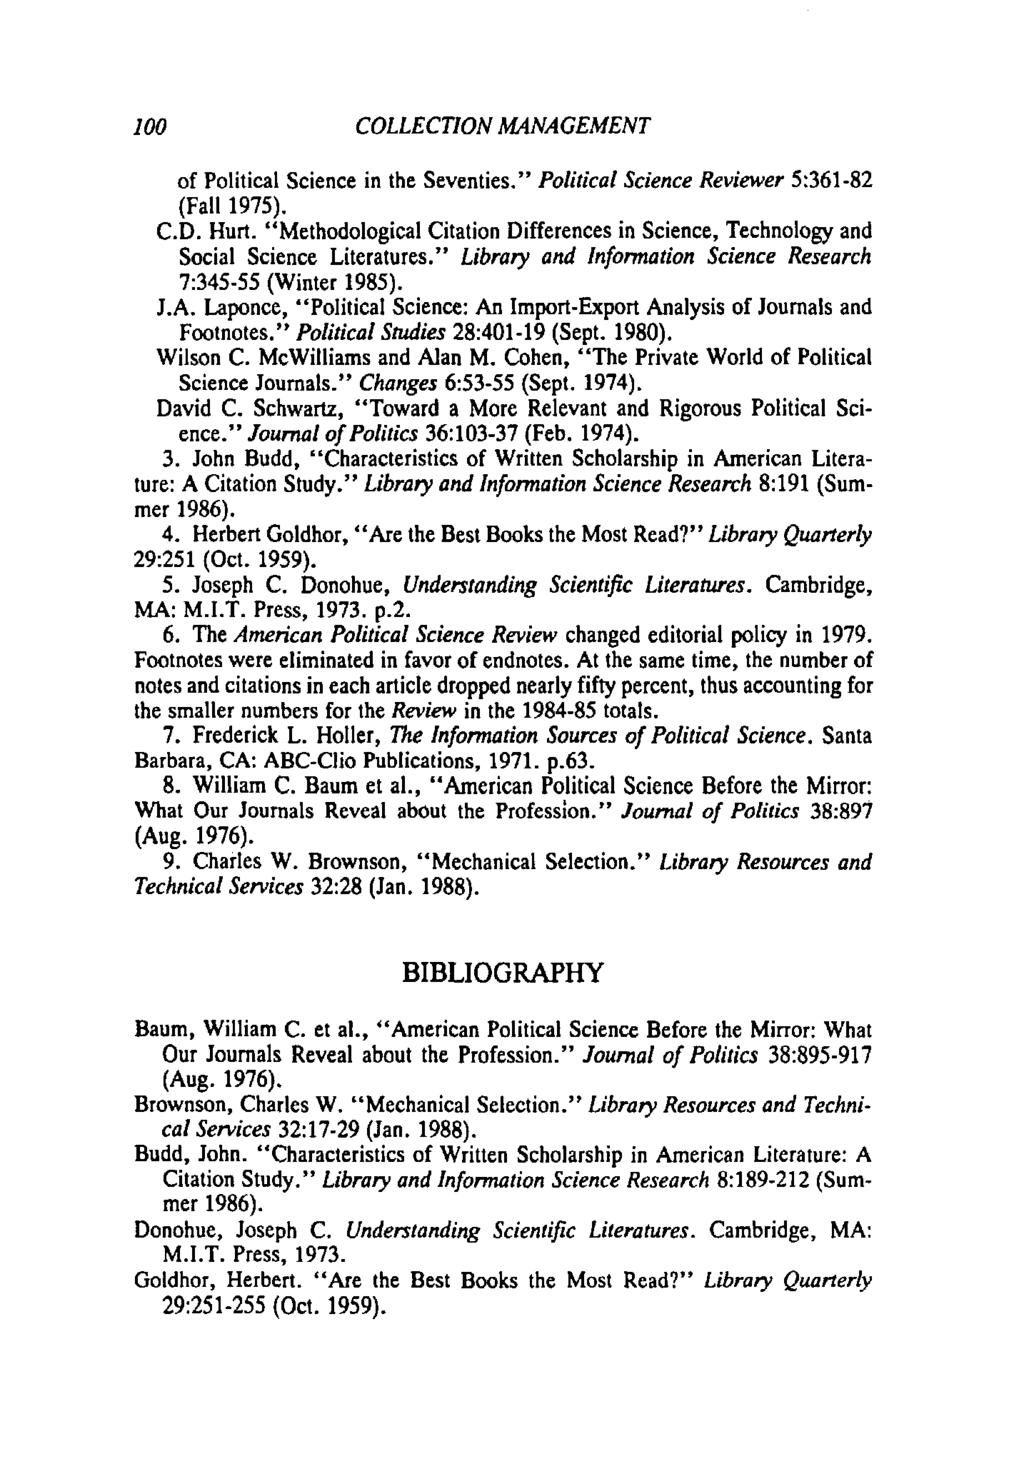 100 COLLECTION MANAGEMENT of Political Science in the Seventies." Political Science Reviewer 5:361-82 (Fall 1975). C.D. Hurt.